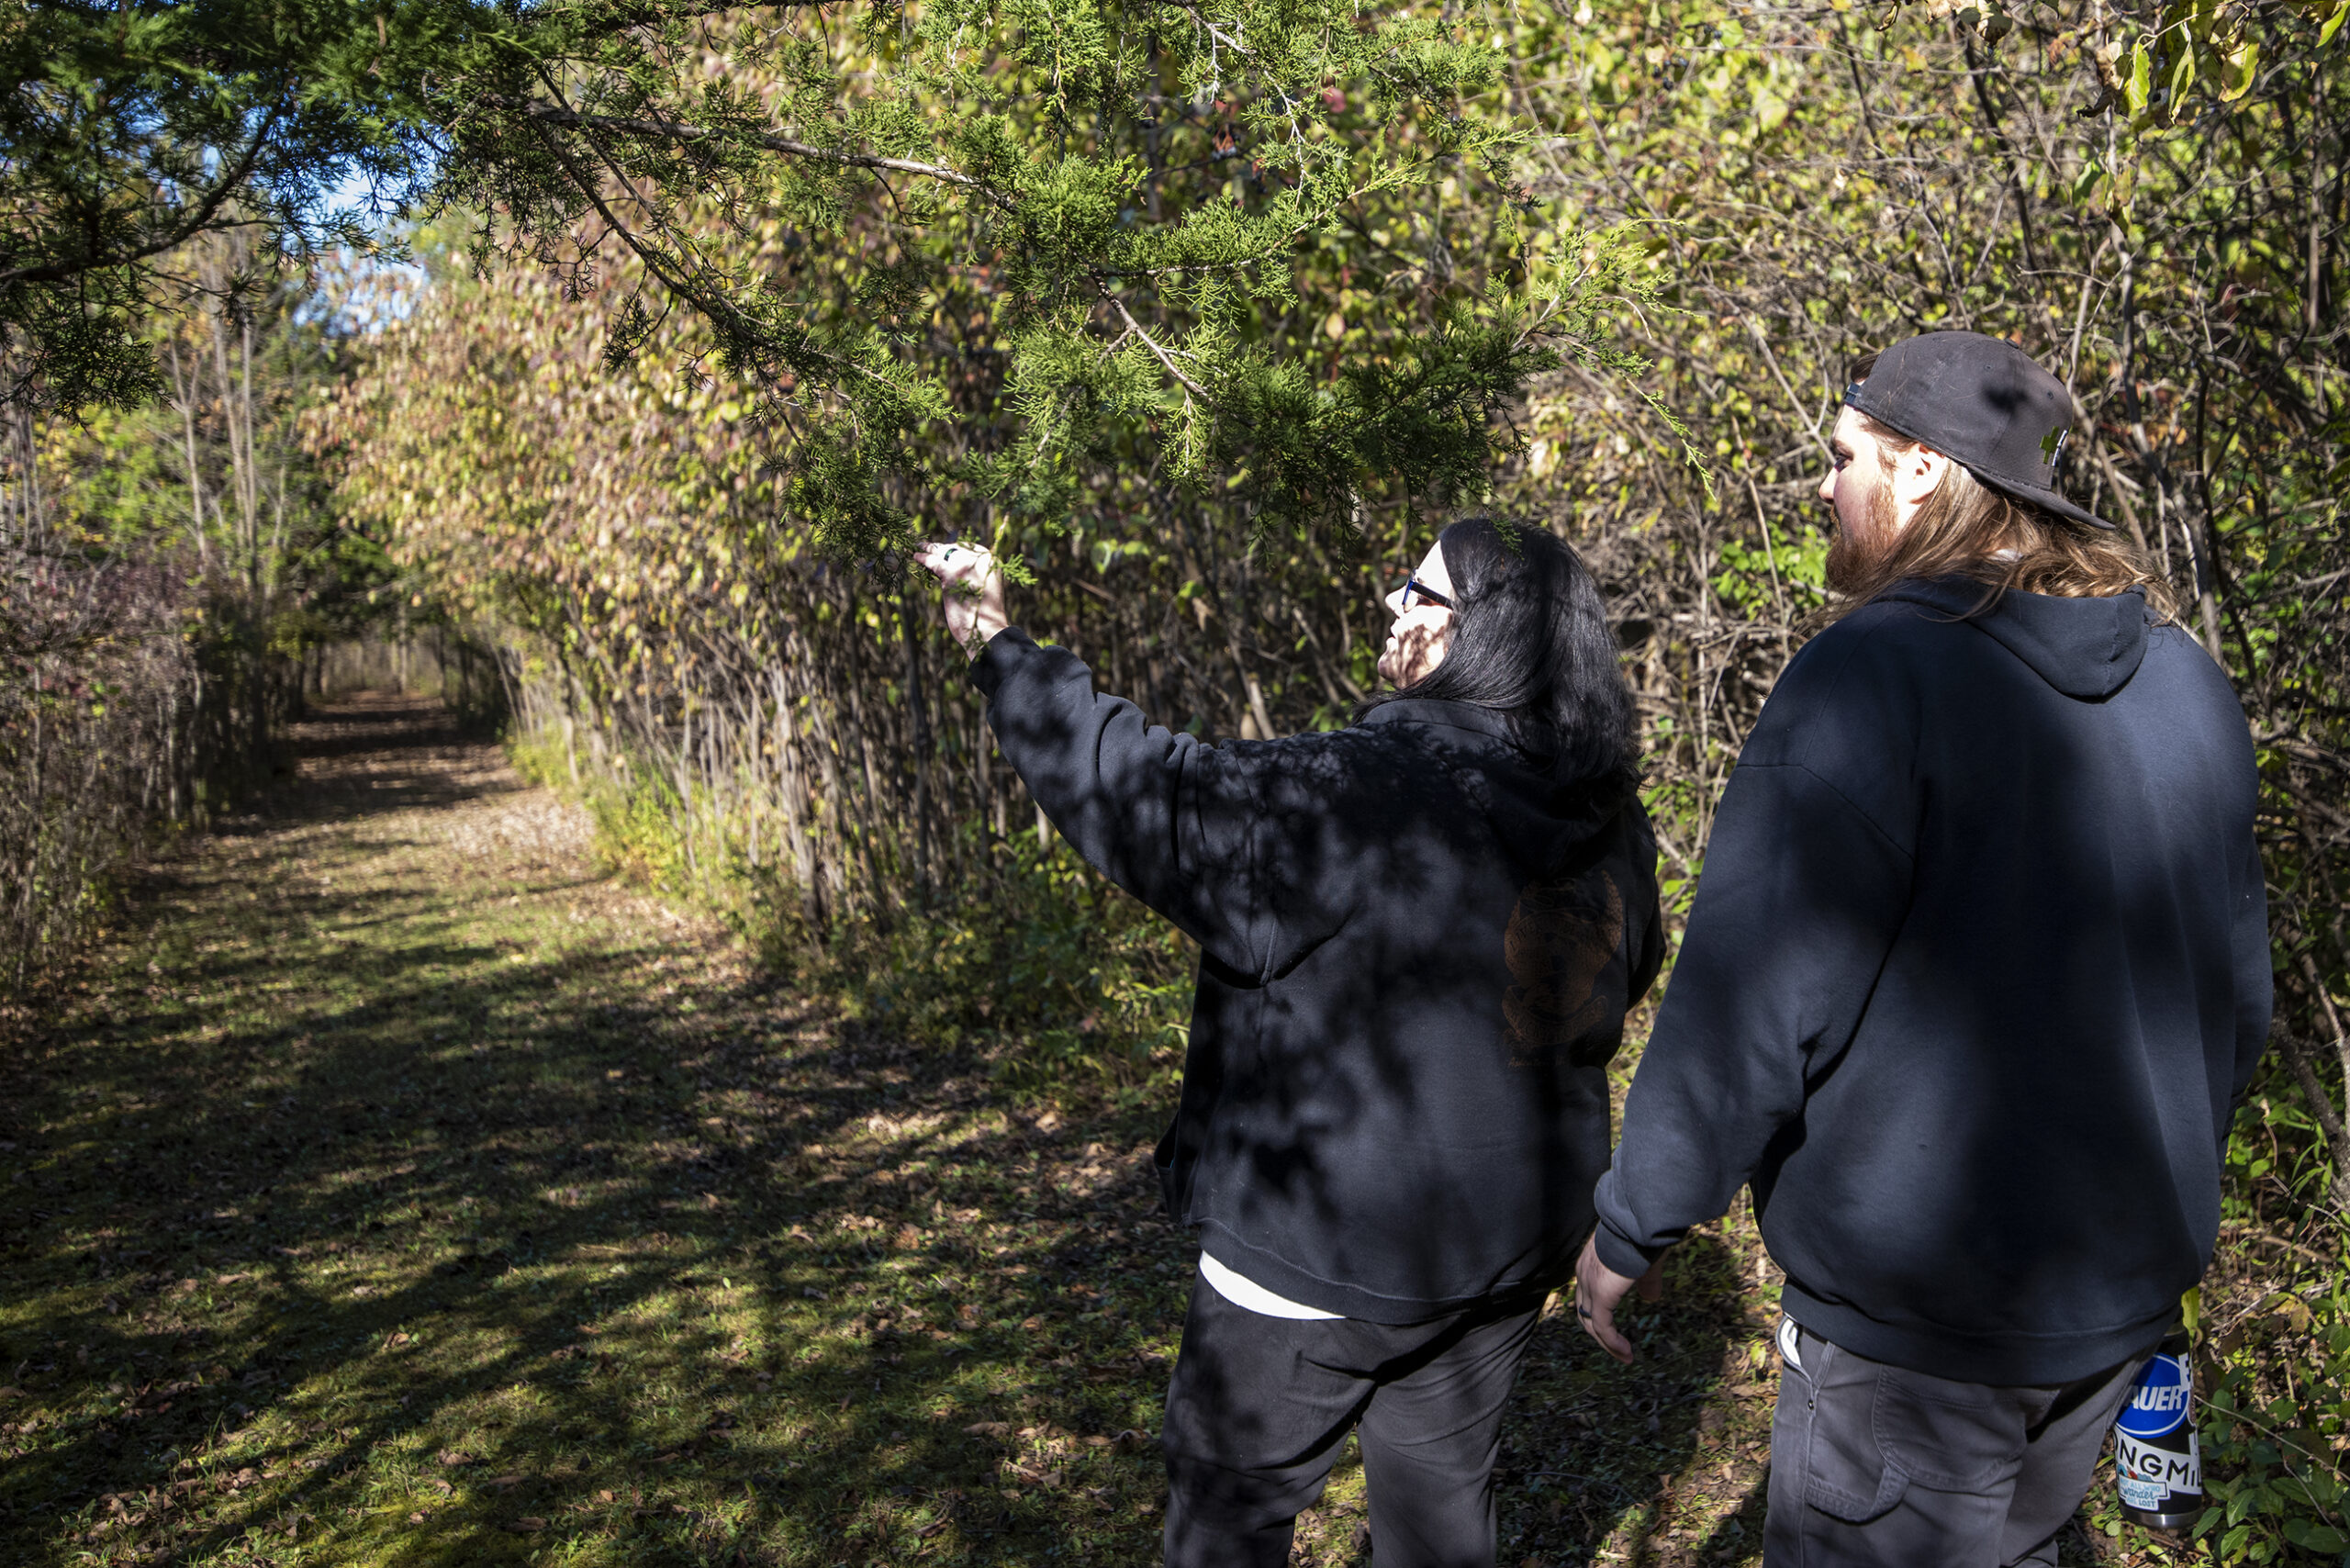 Jodi Davies and her partner Clayton LaCroix begin their search for the oldest tree in Wisconsin on Sunday, Oct. 17, 2021, in Greenleaf, Wis.